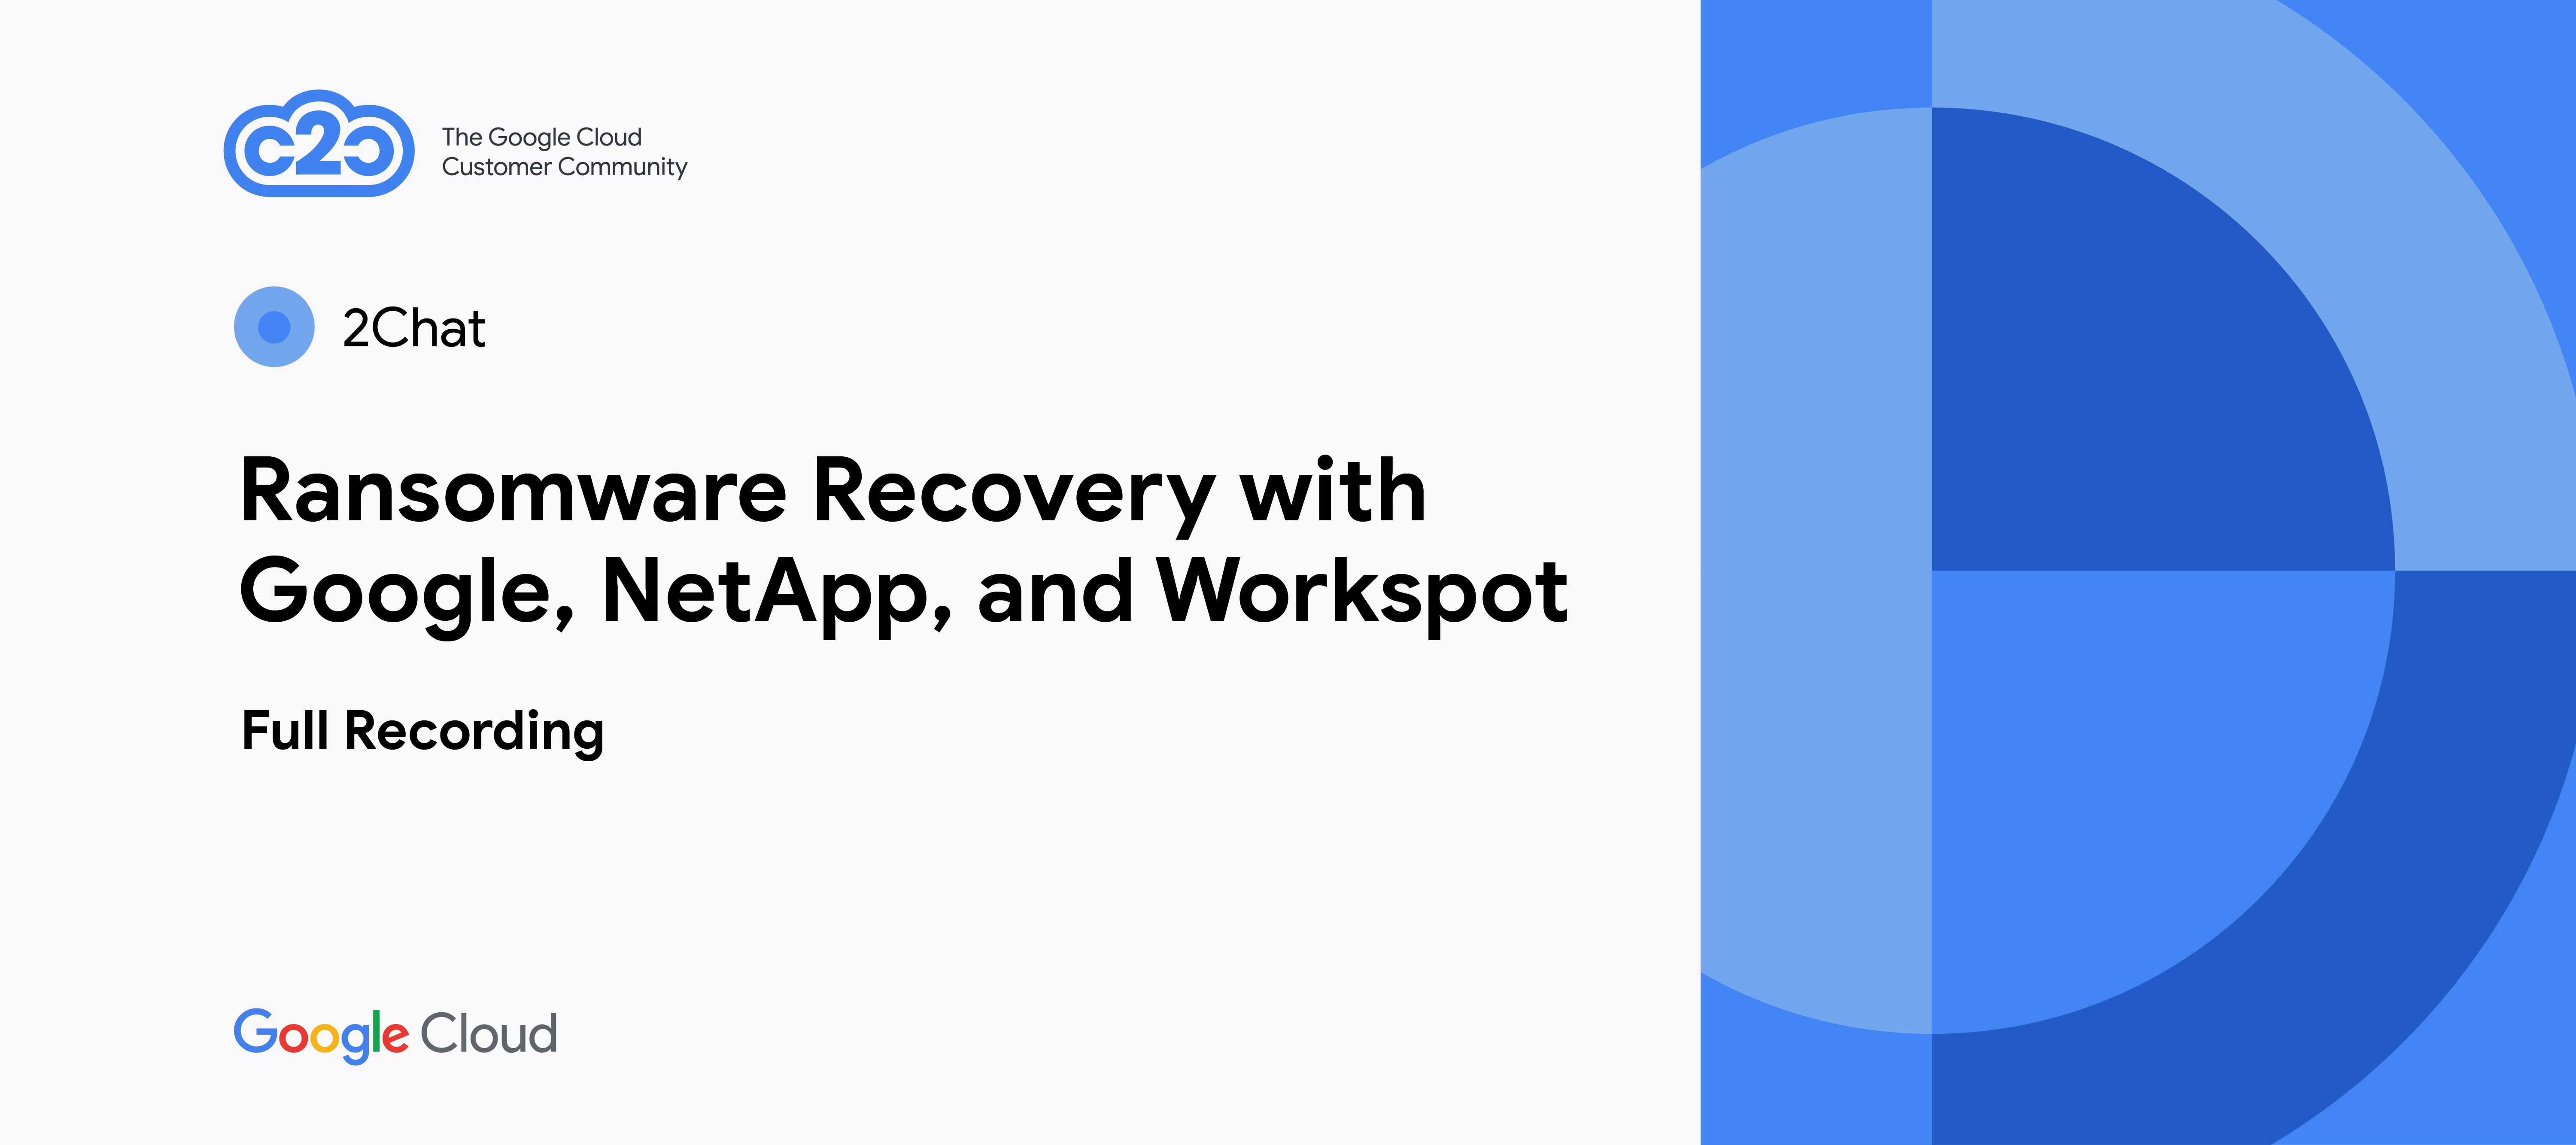 Ransomware Recovery with Google, NetApp, and Workspot (full recording)